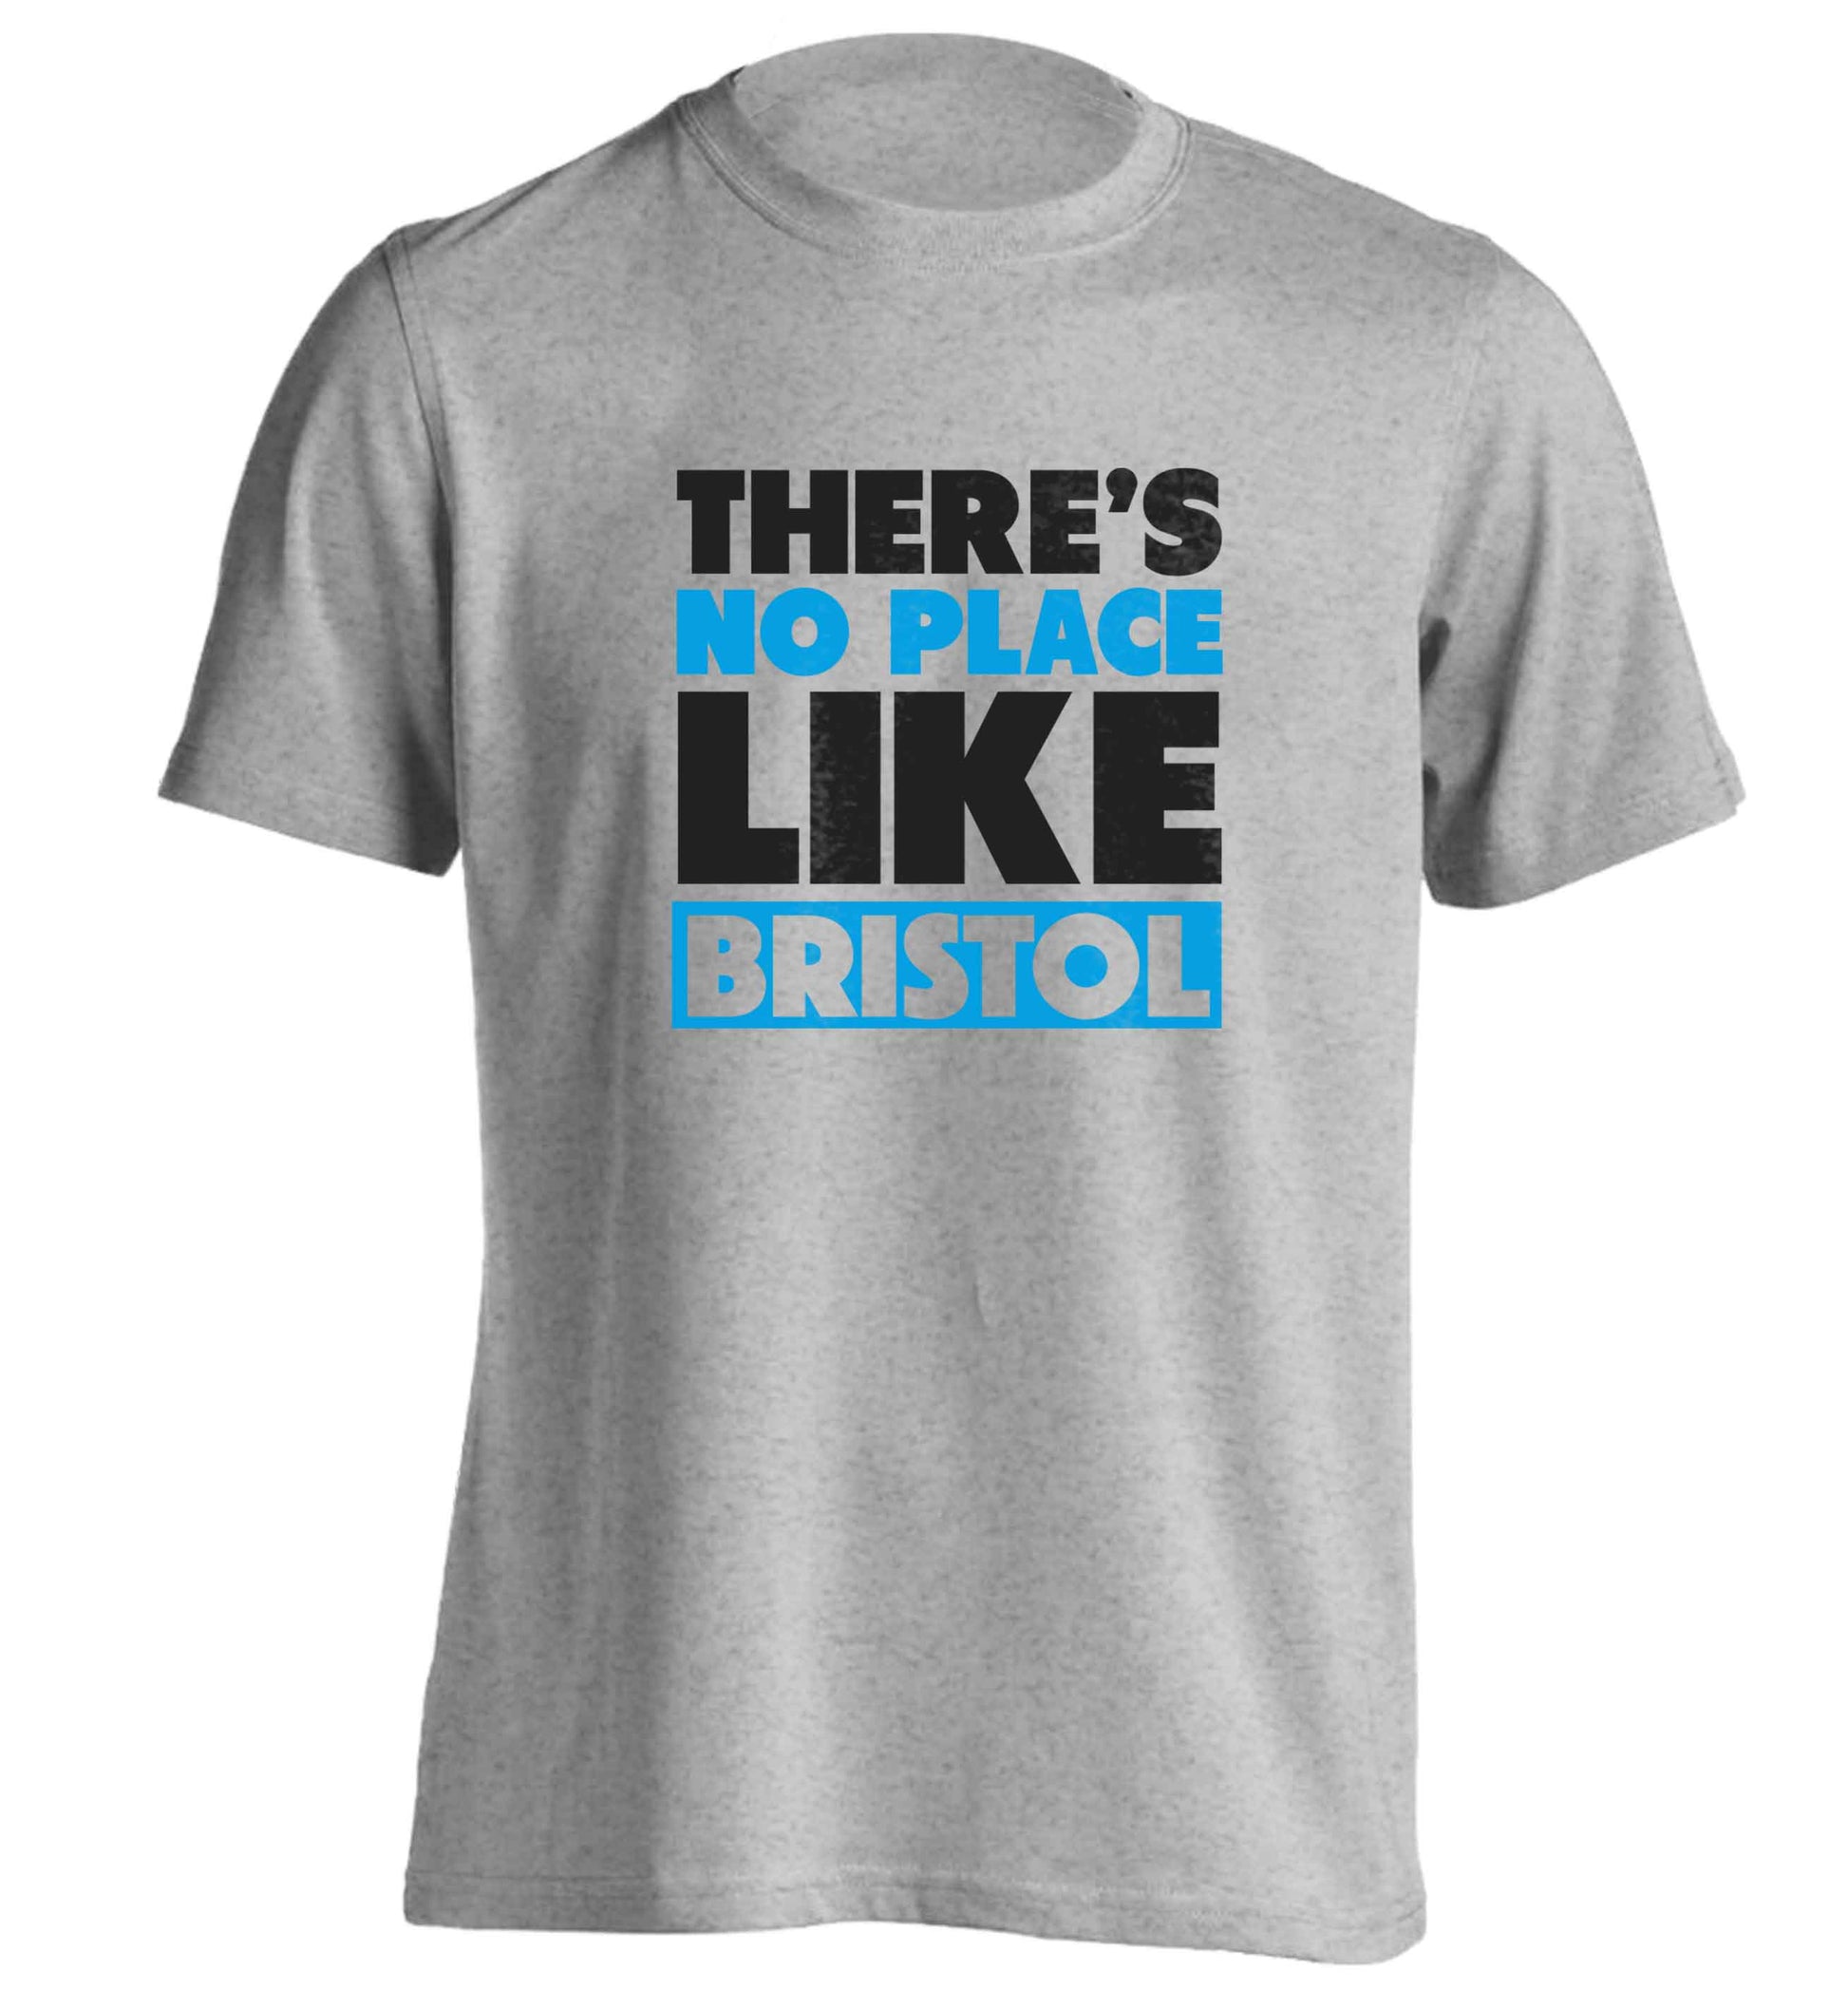 There's no place like Bristol adults unisex grey Tshirt 2XL